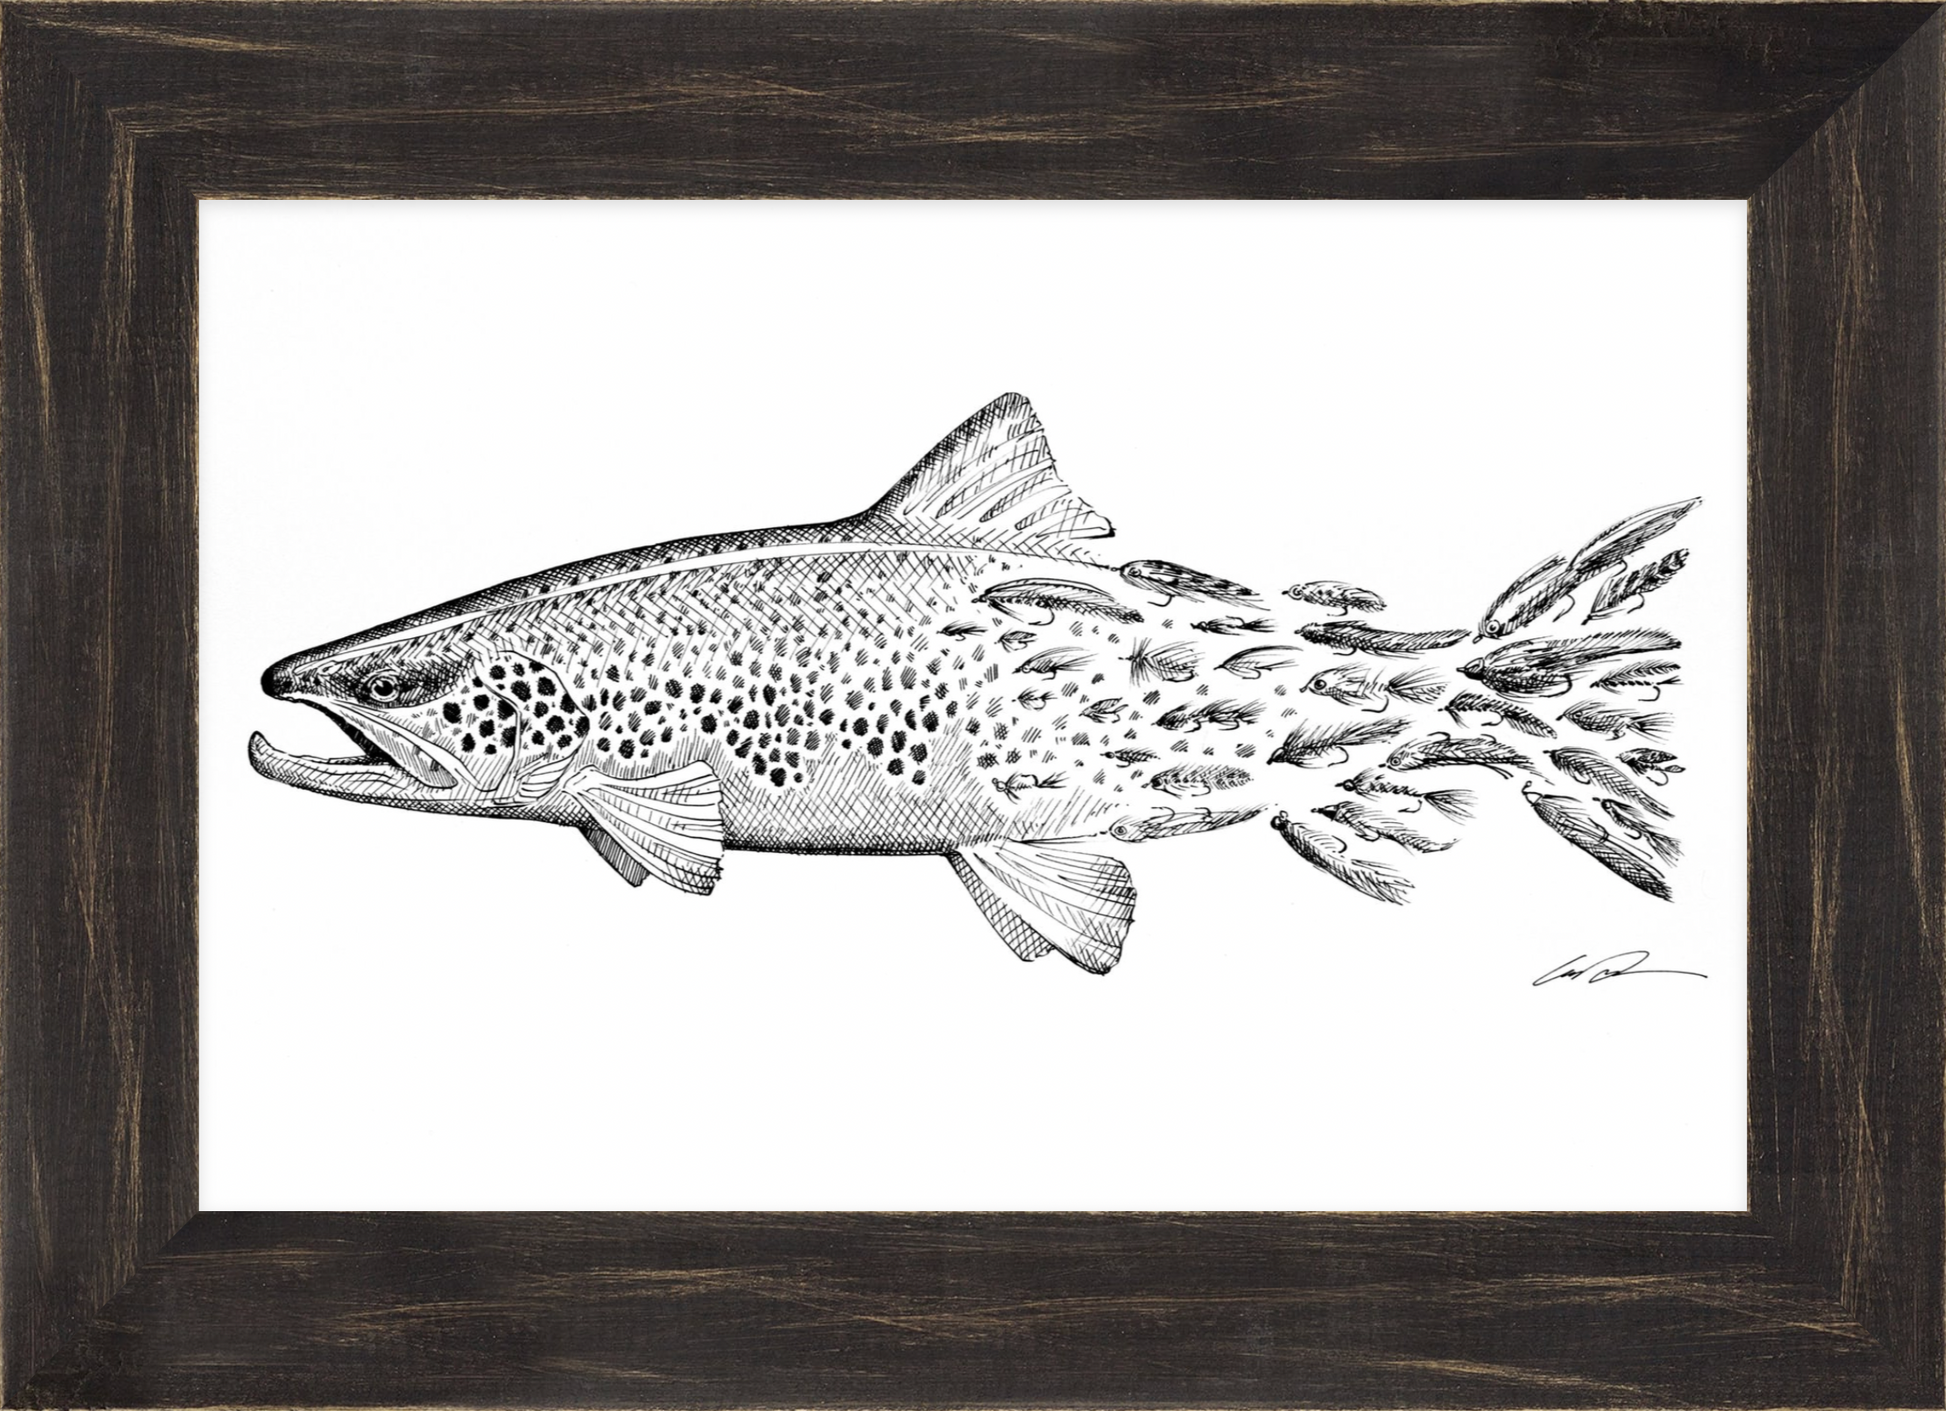 A pen and ink drawing of a brown trout where the trout's spots fade into flies to form the tail of the fish, framed in black rustic frame